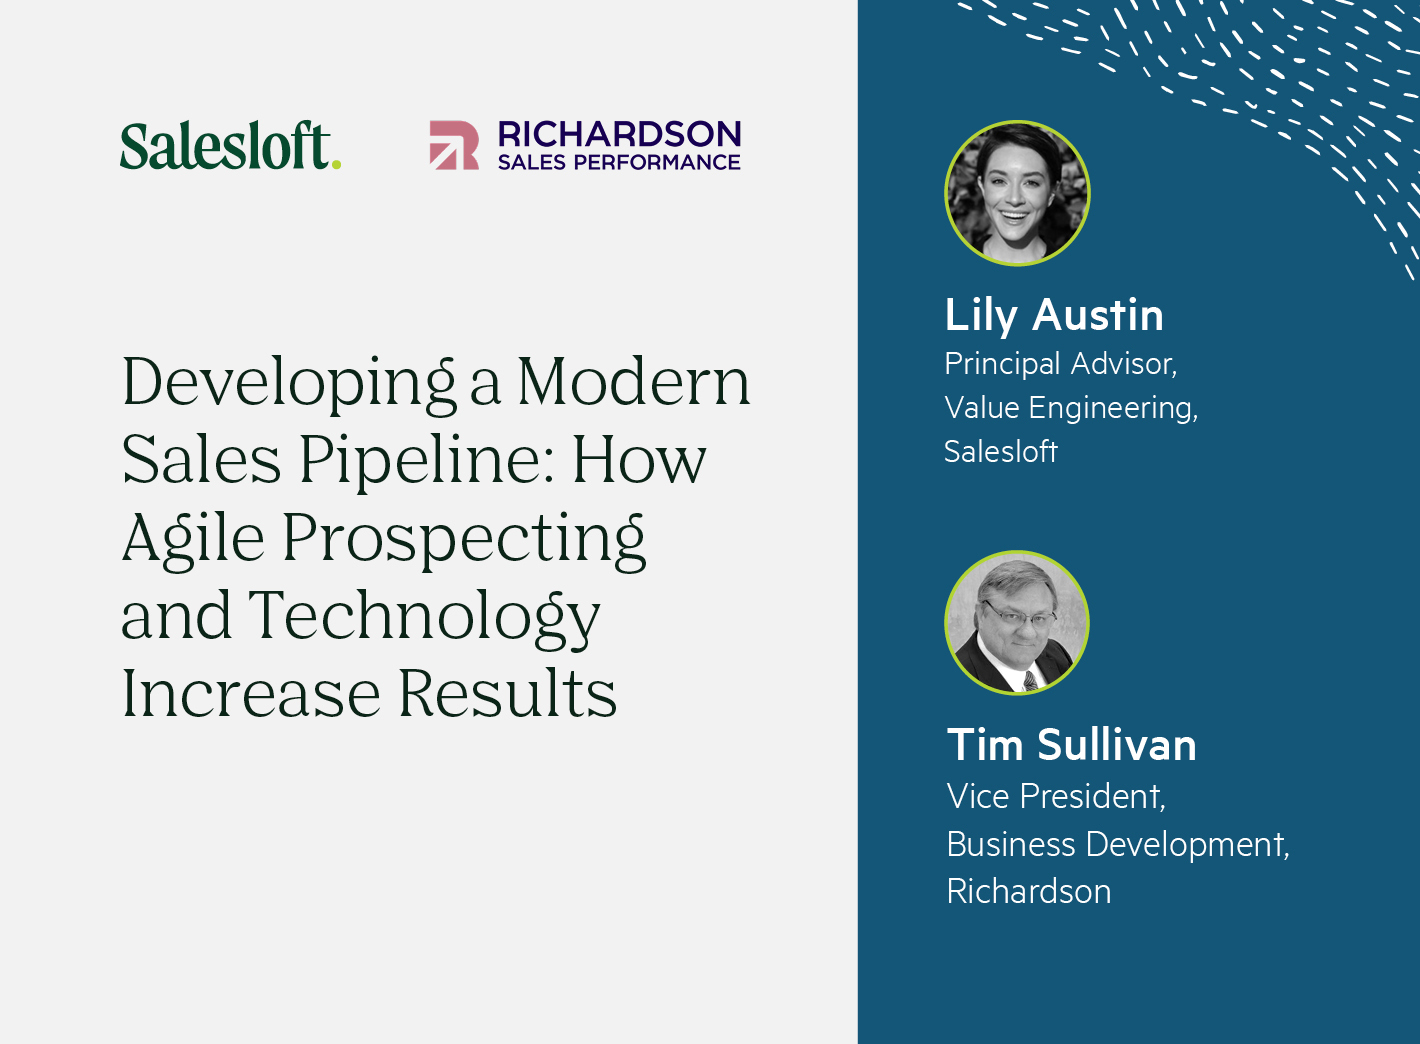 Developing a Modern Sales Pipeline: How Agile Prospecting and Technology Increase Results